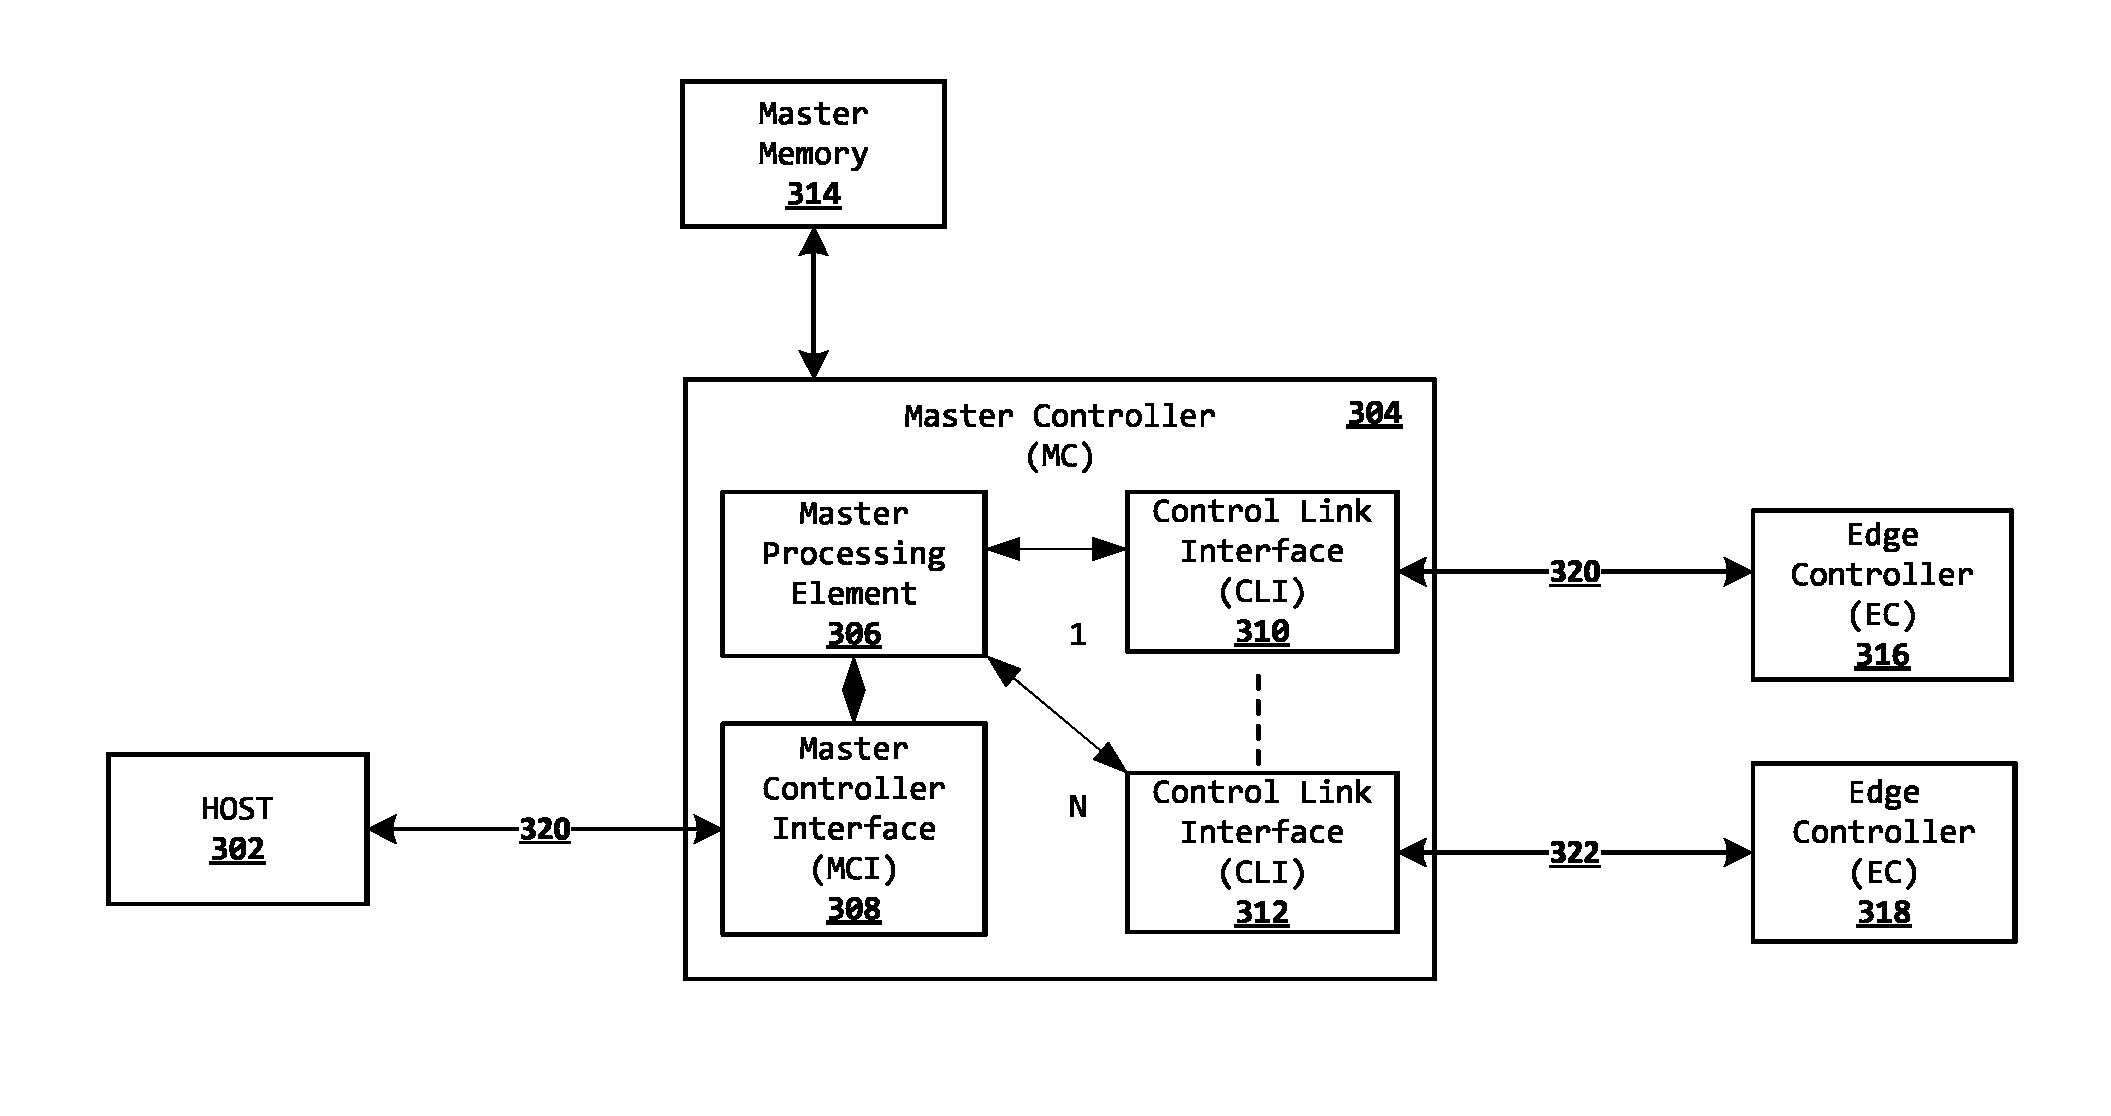 System and method for abstracting SATA and/or SAS storage media devices via a full duplex queued command interface to increase performance, lower host overhead, and simplify scaling storage media devices and systems